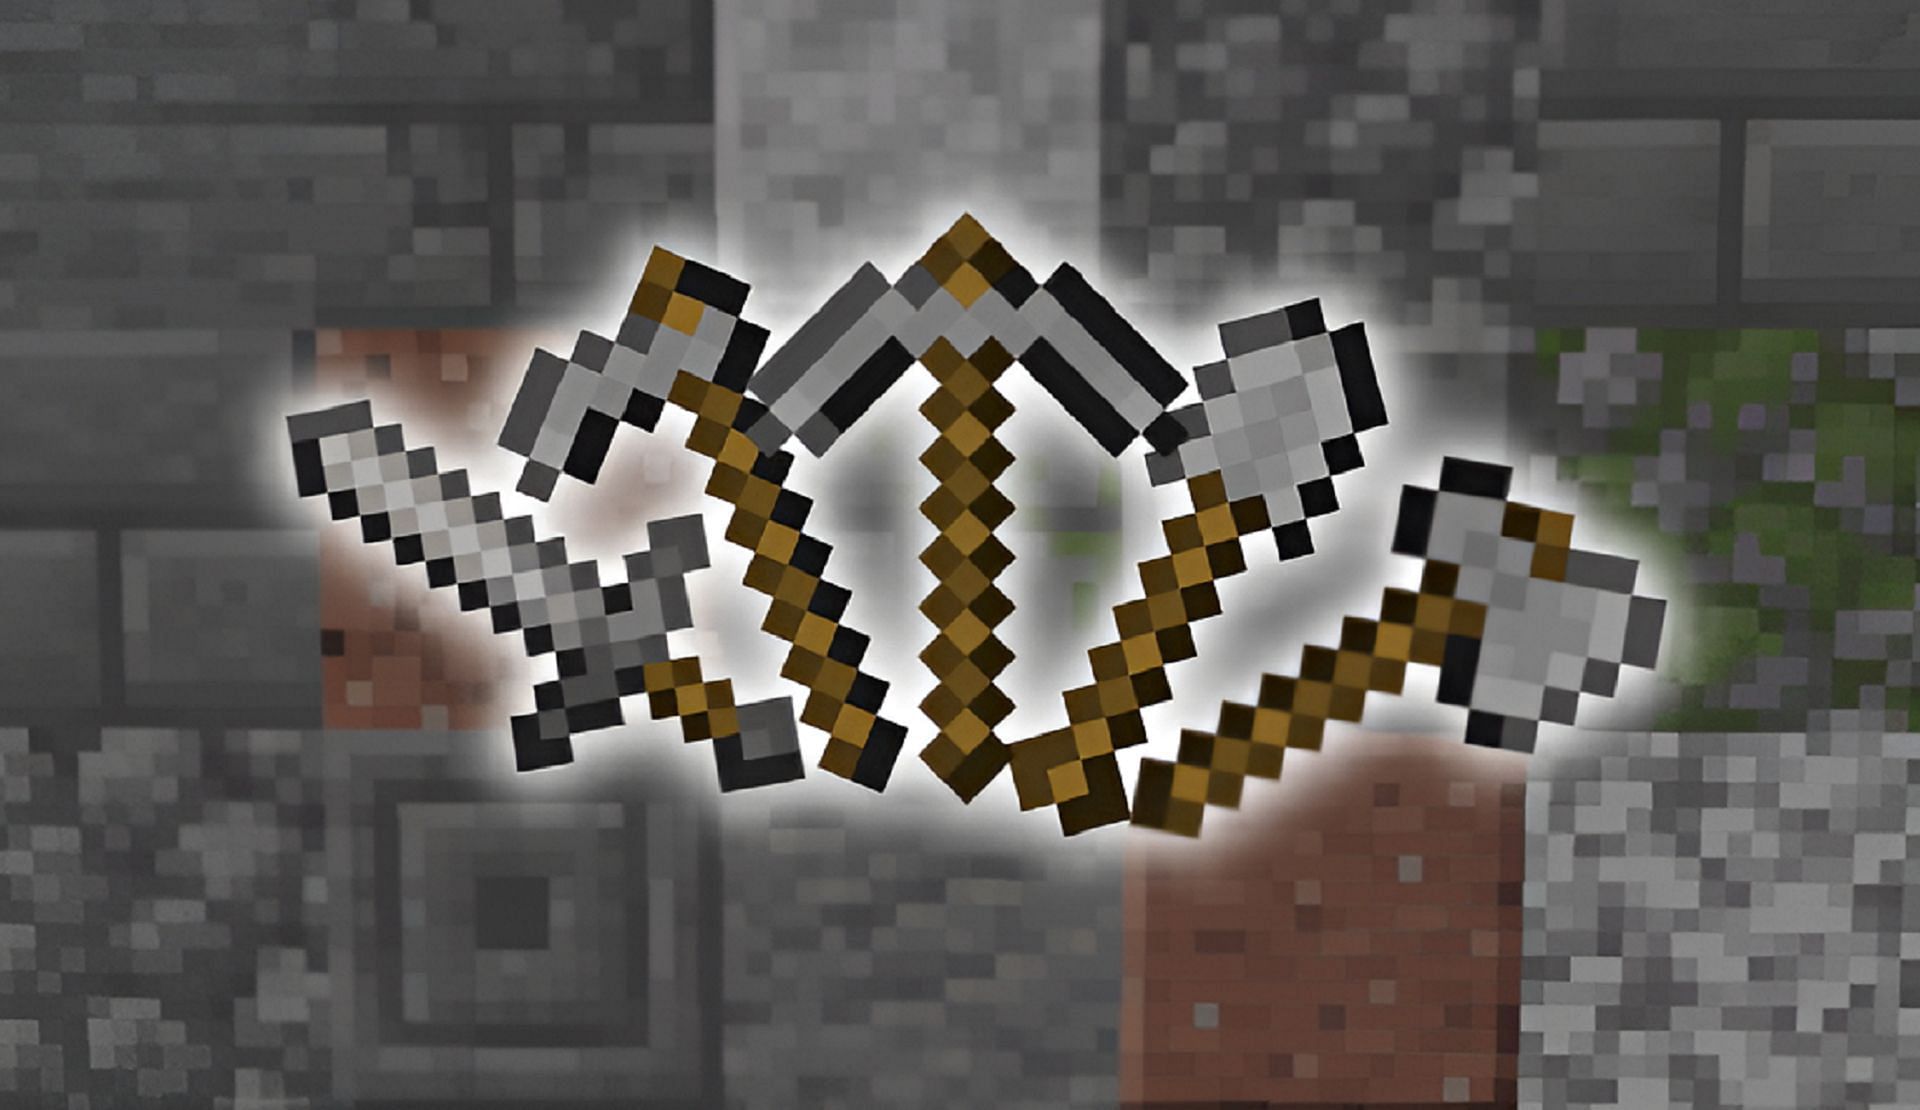 Stone tools will keep players from constantly crafting wooden ones (Image via Manuelst/Planet Minecraft)